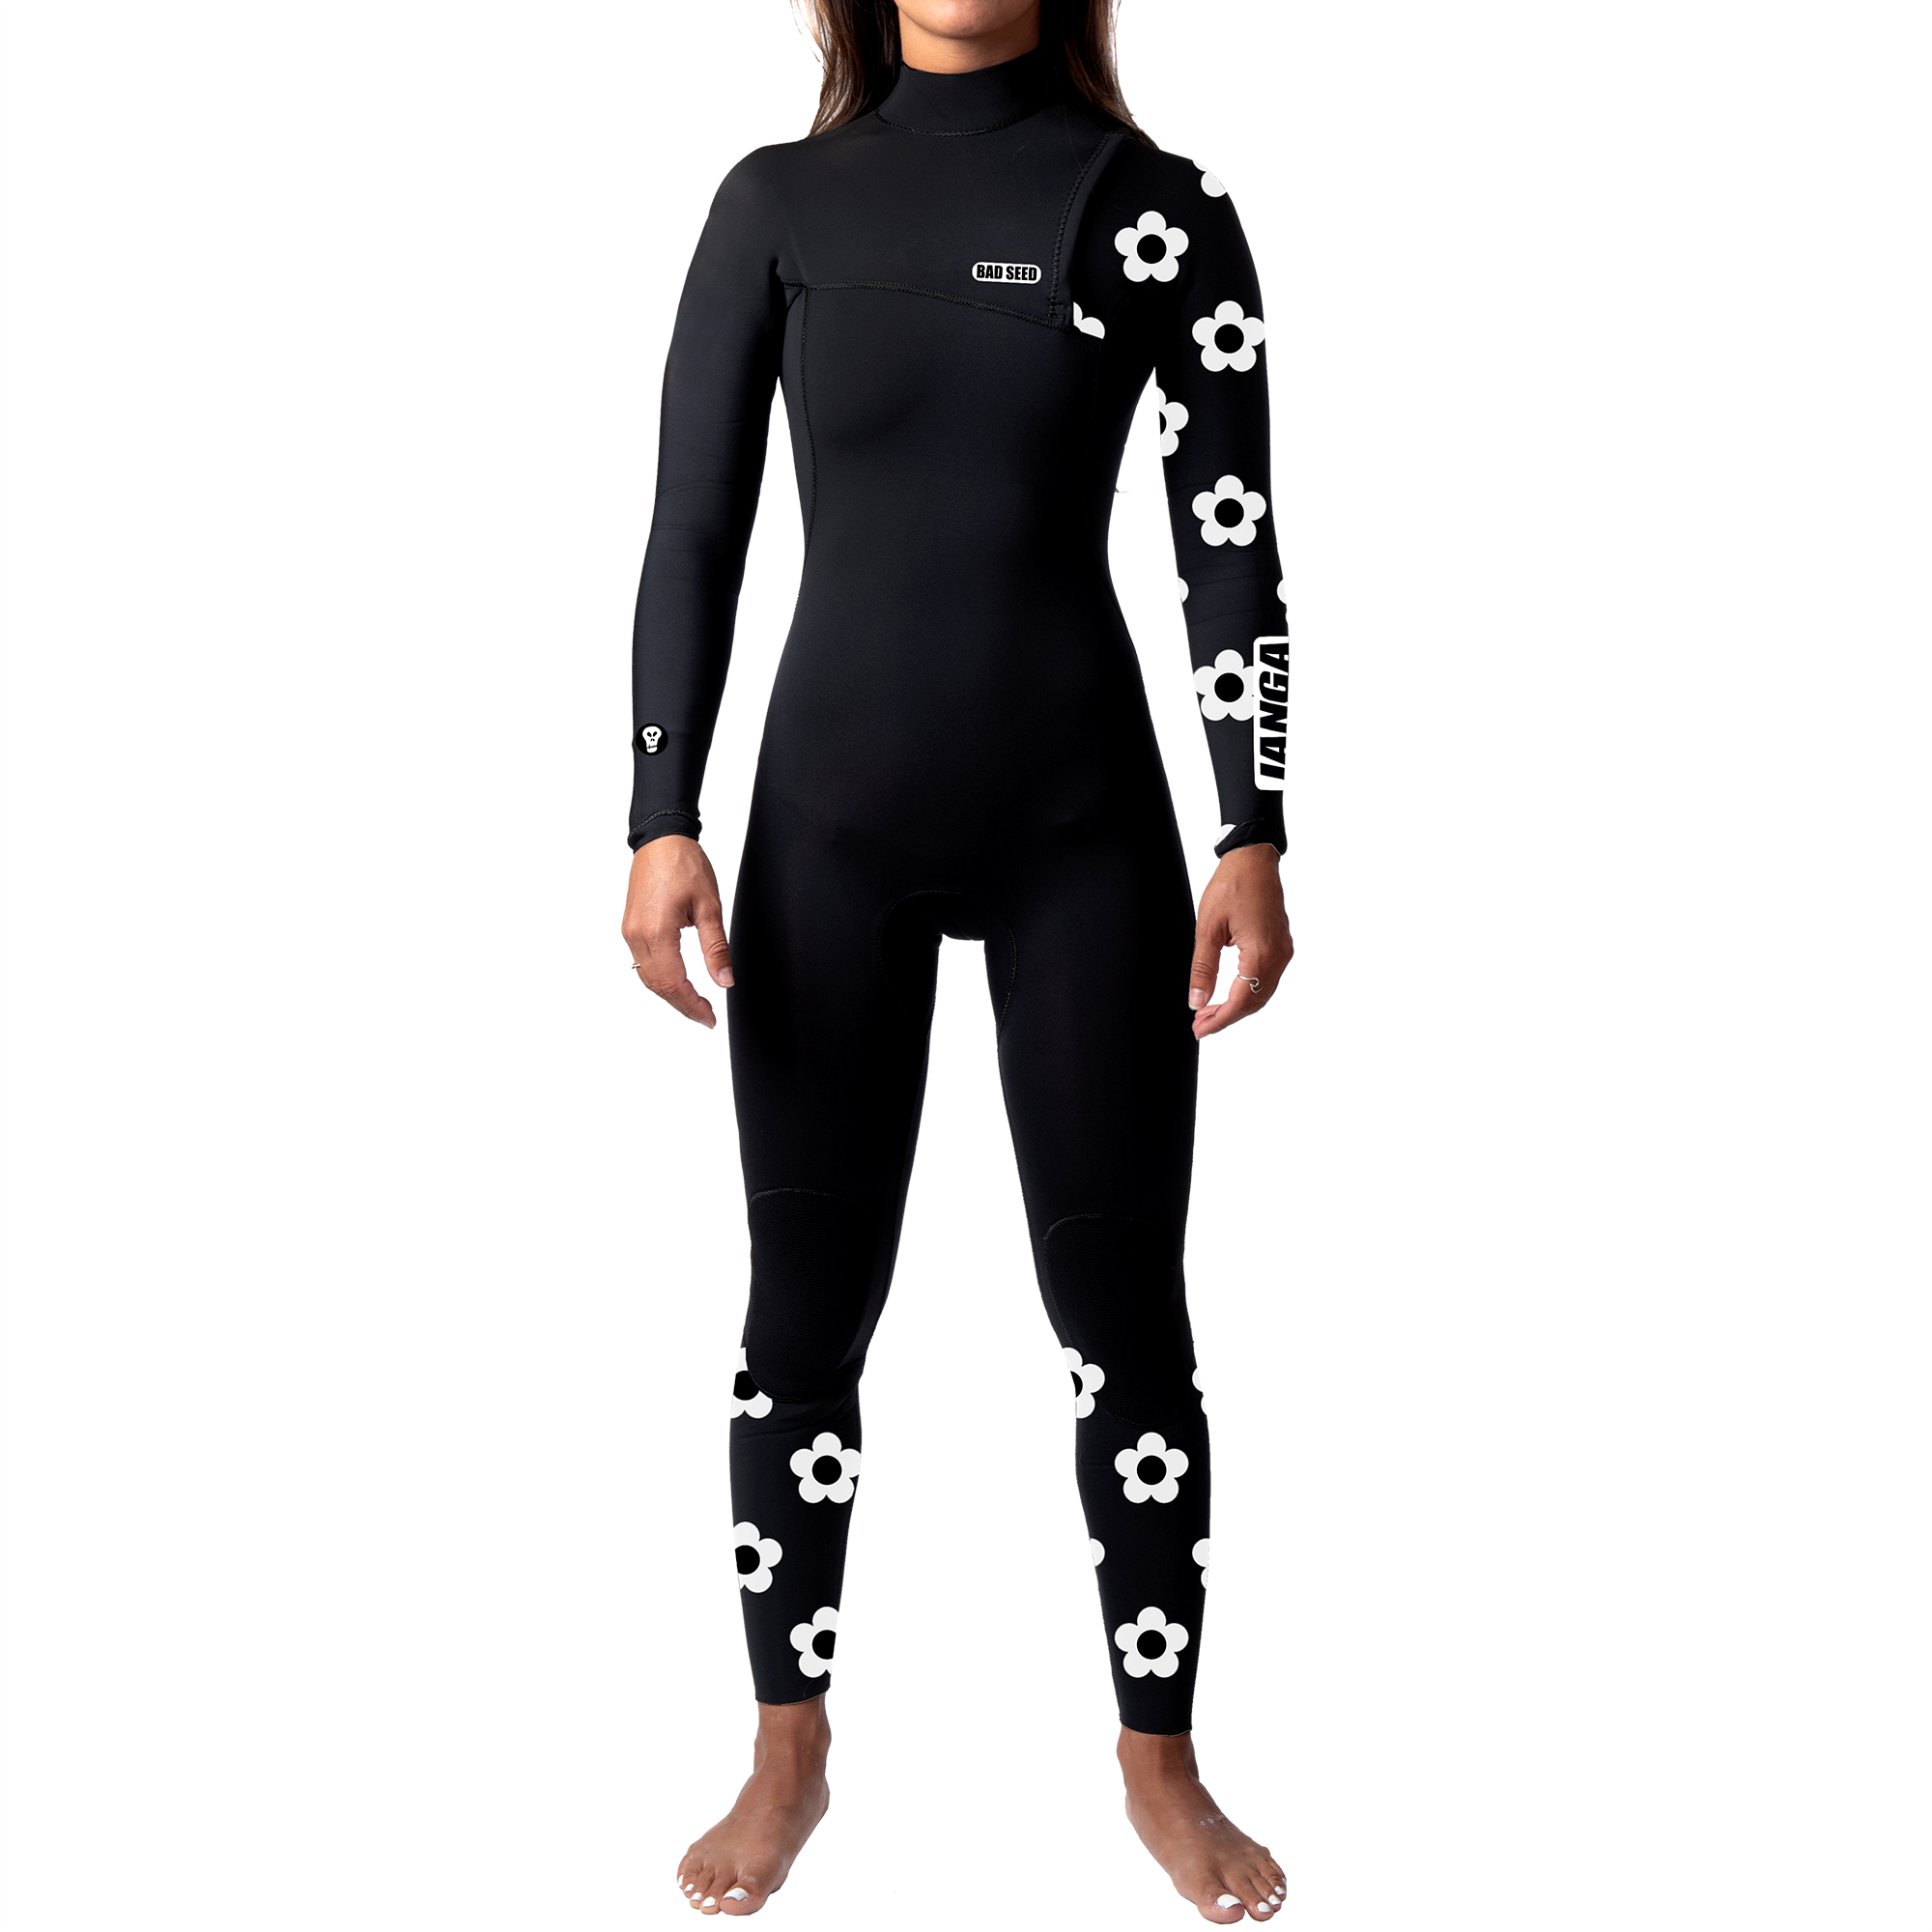 BAD SEED WETSUIT